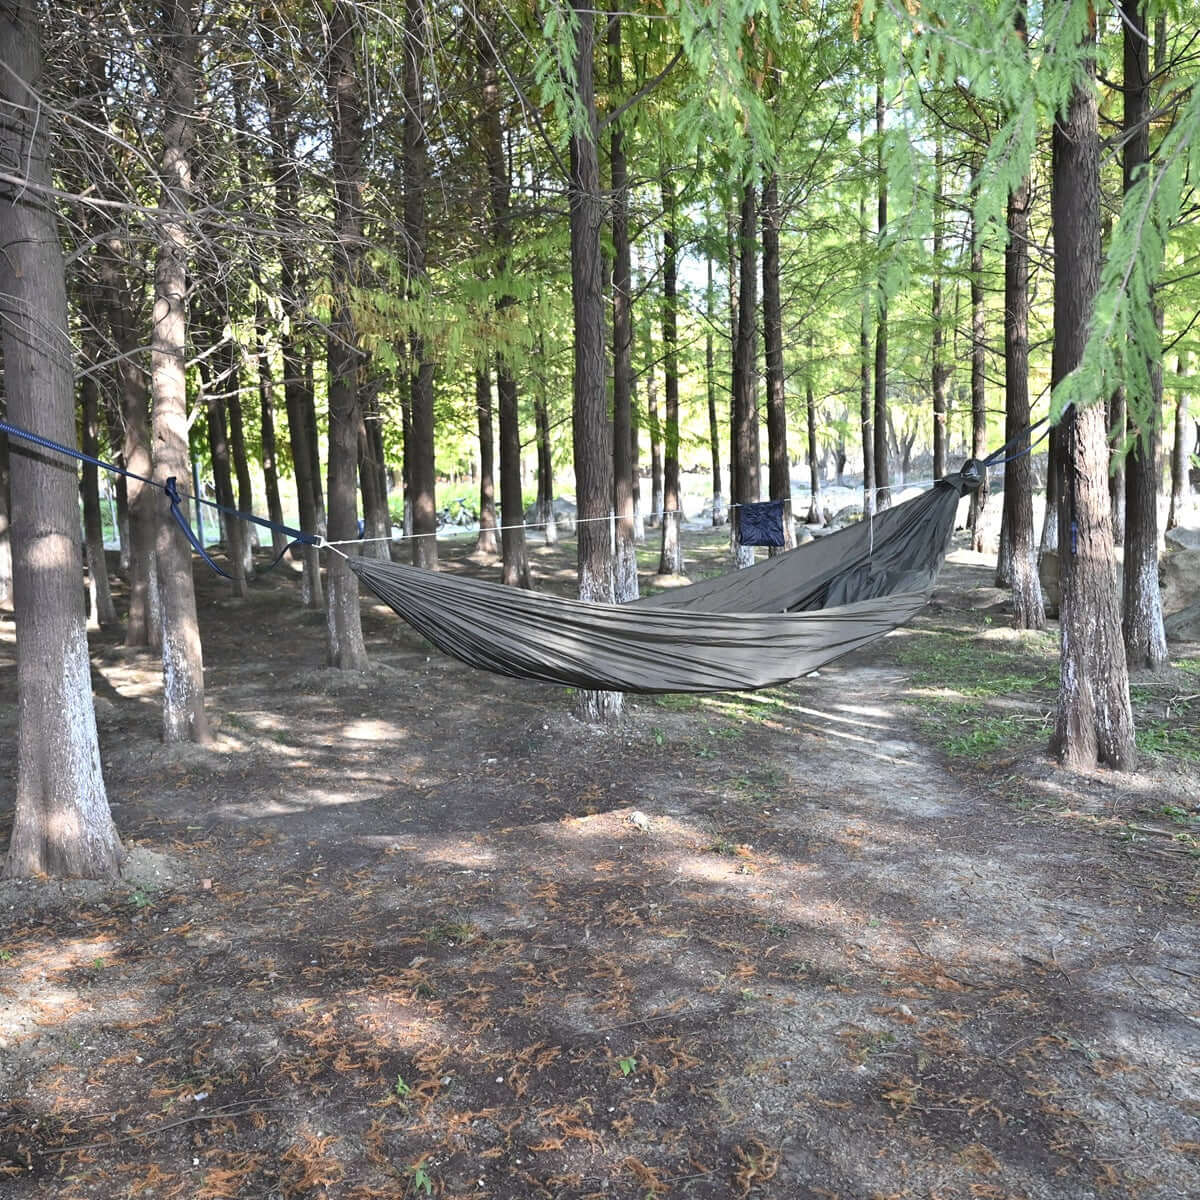 Double- Layer Hammock | Onewind Outdoors